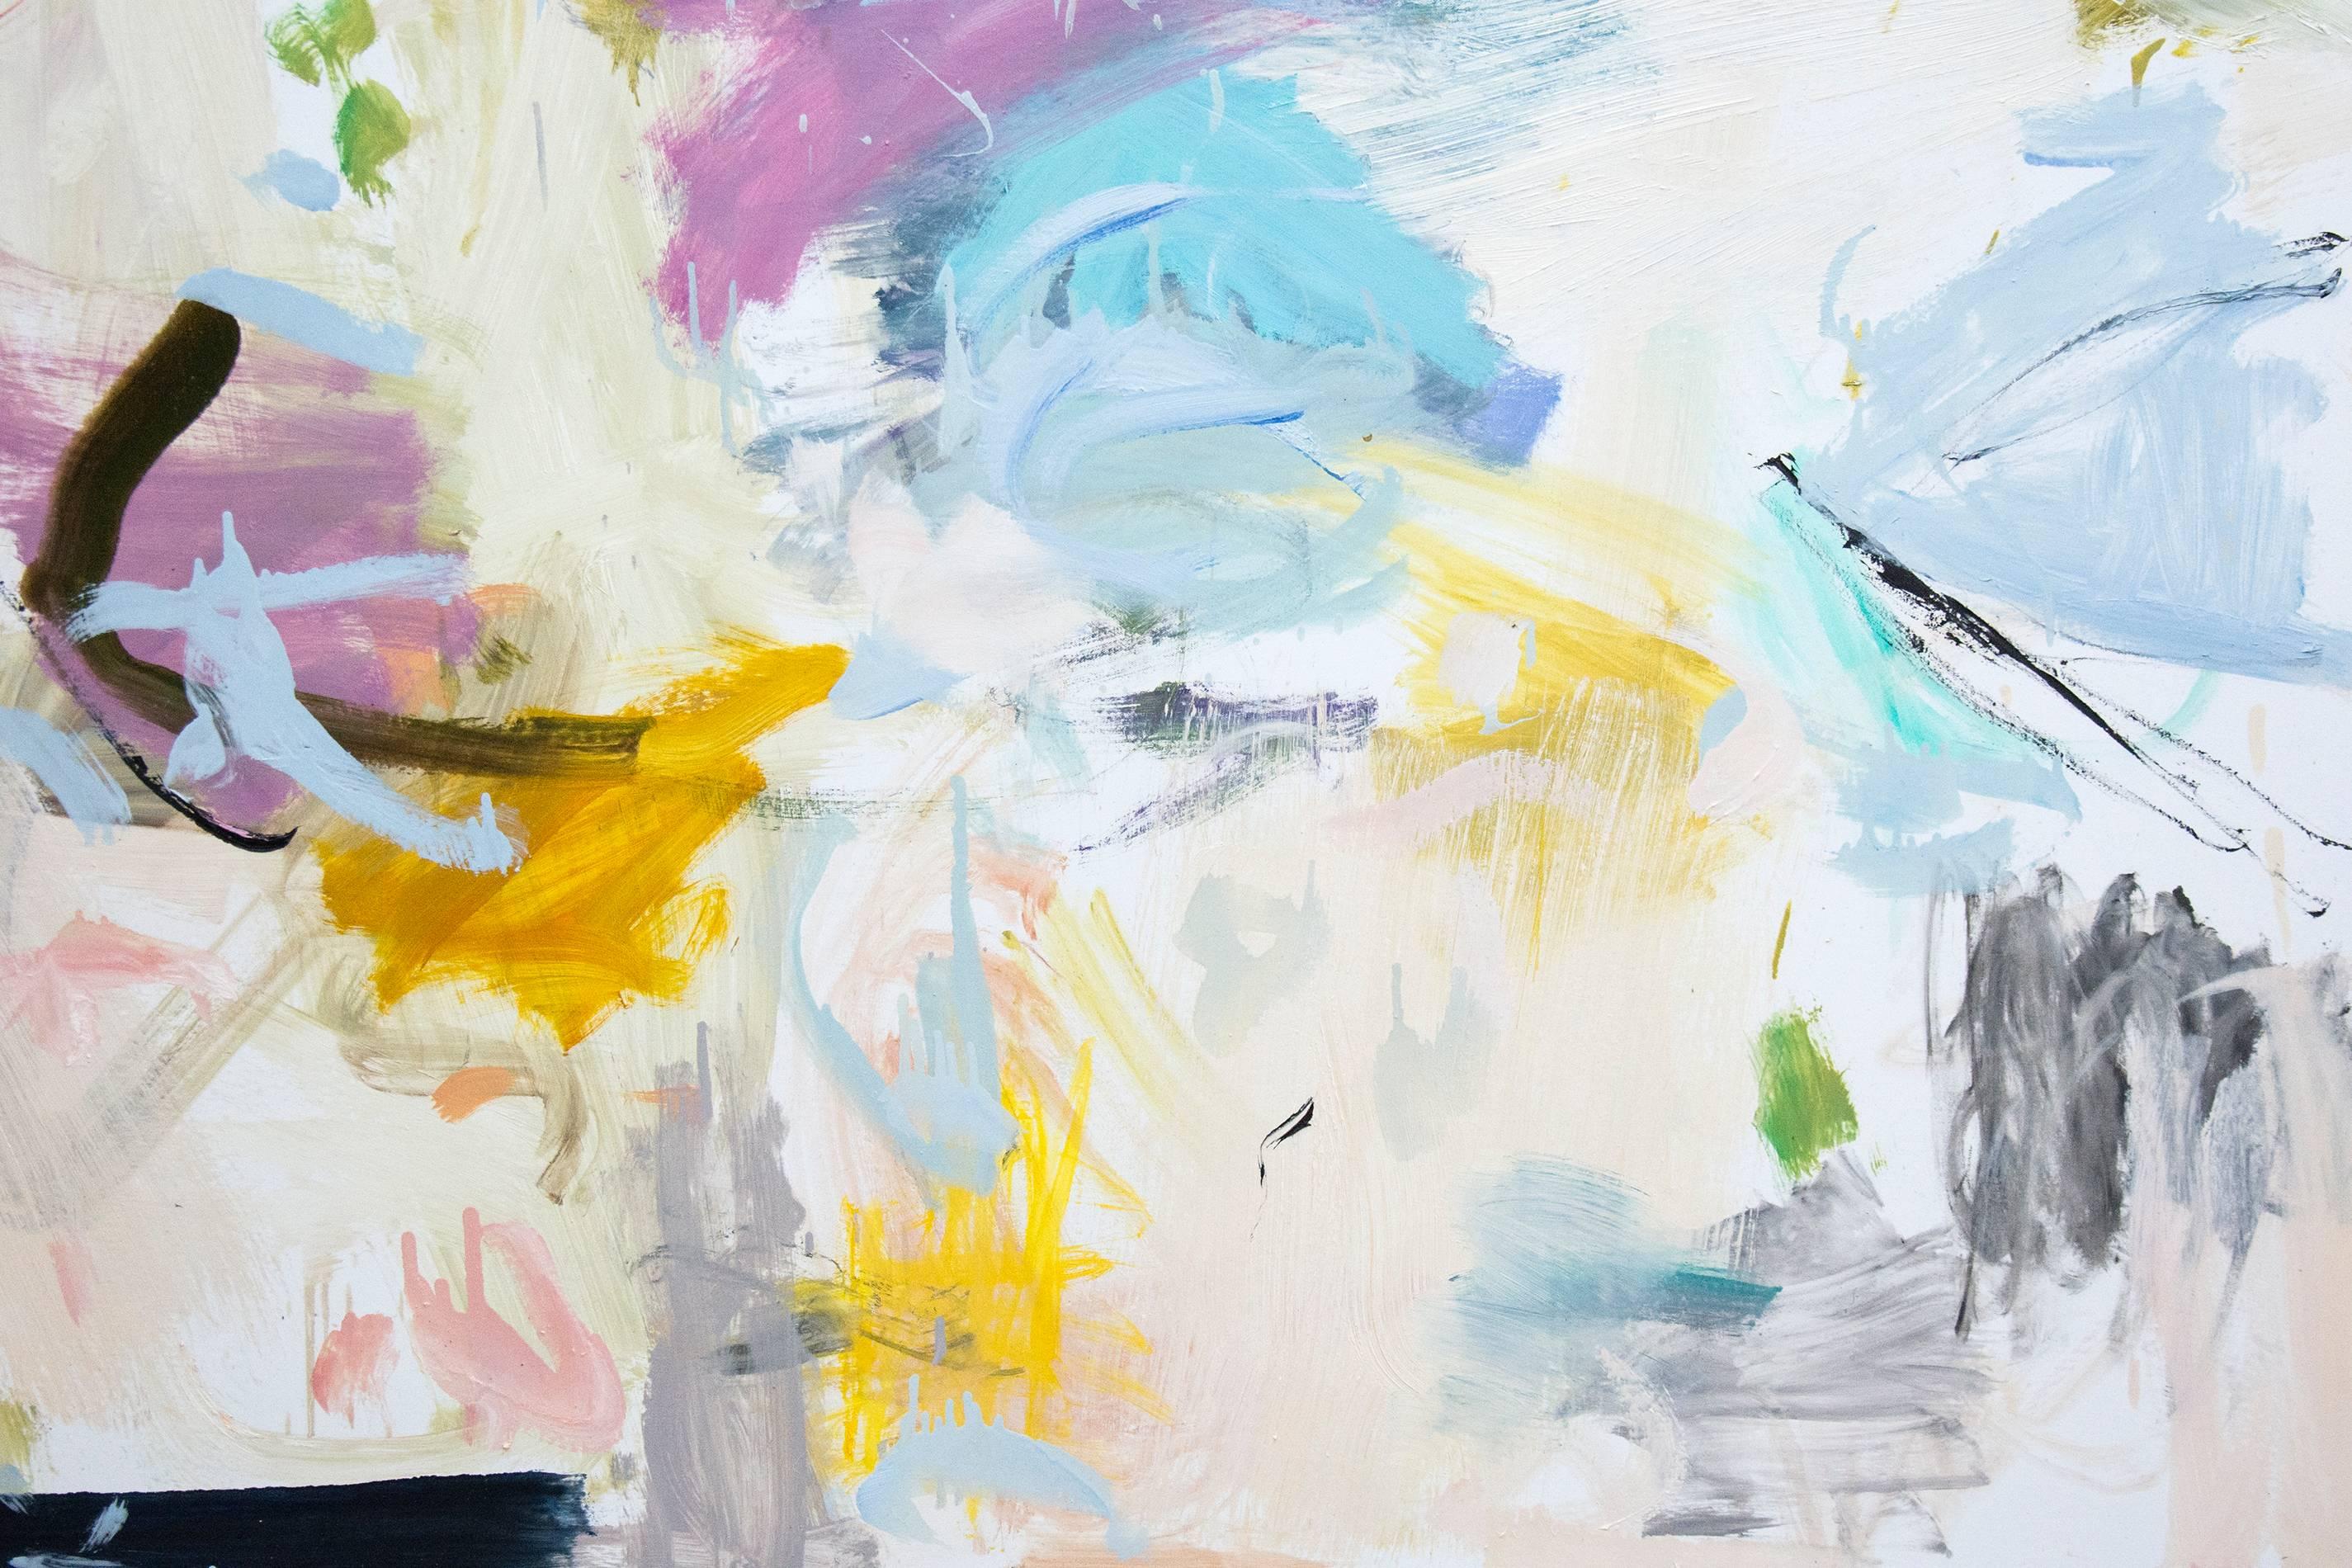 Kairoi No 05 - large, bright, colourful pastels, gestural abstract oil on canvas - Painting by Scott Pattinson